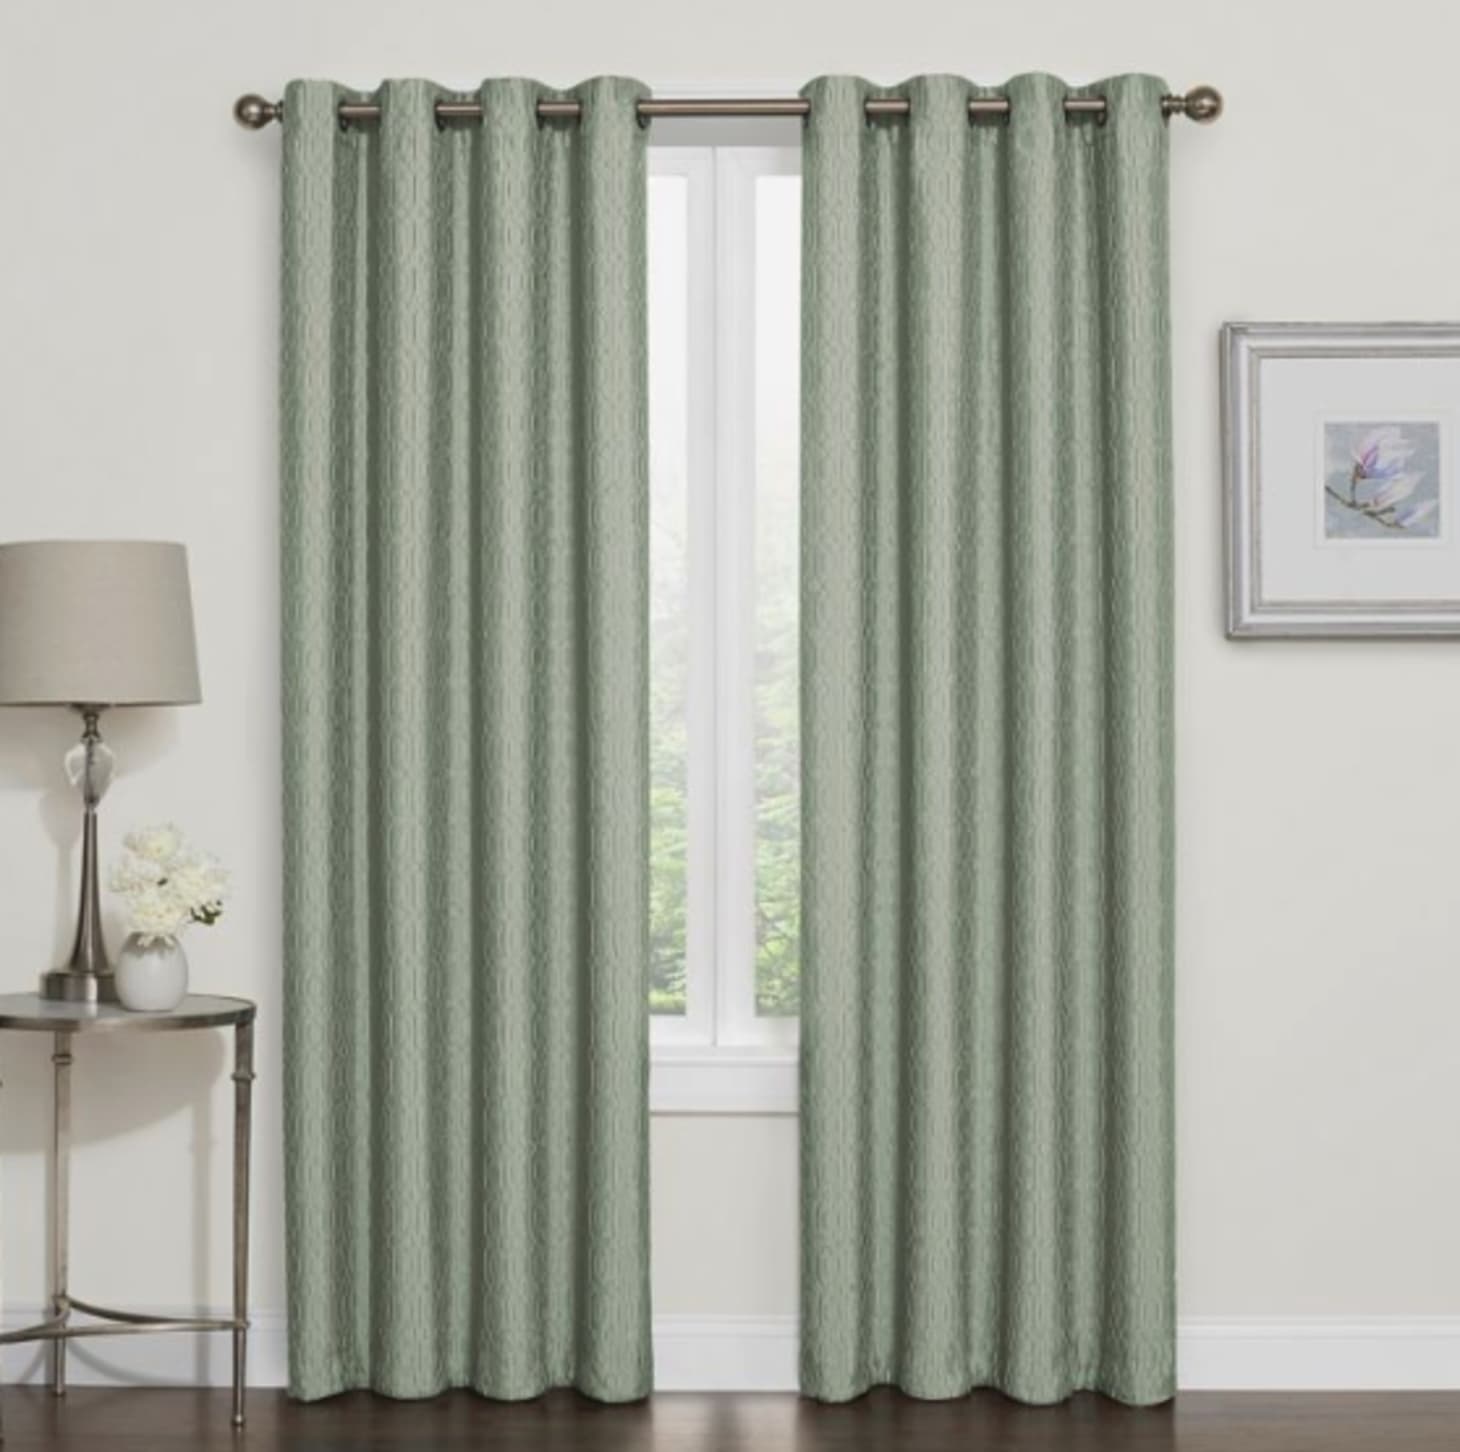 Best Places To Buy Cheap Blinds Shades And Curtains Apartment